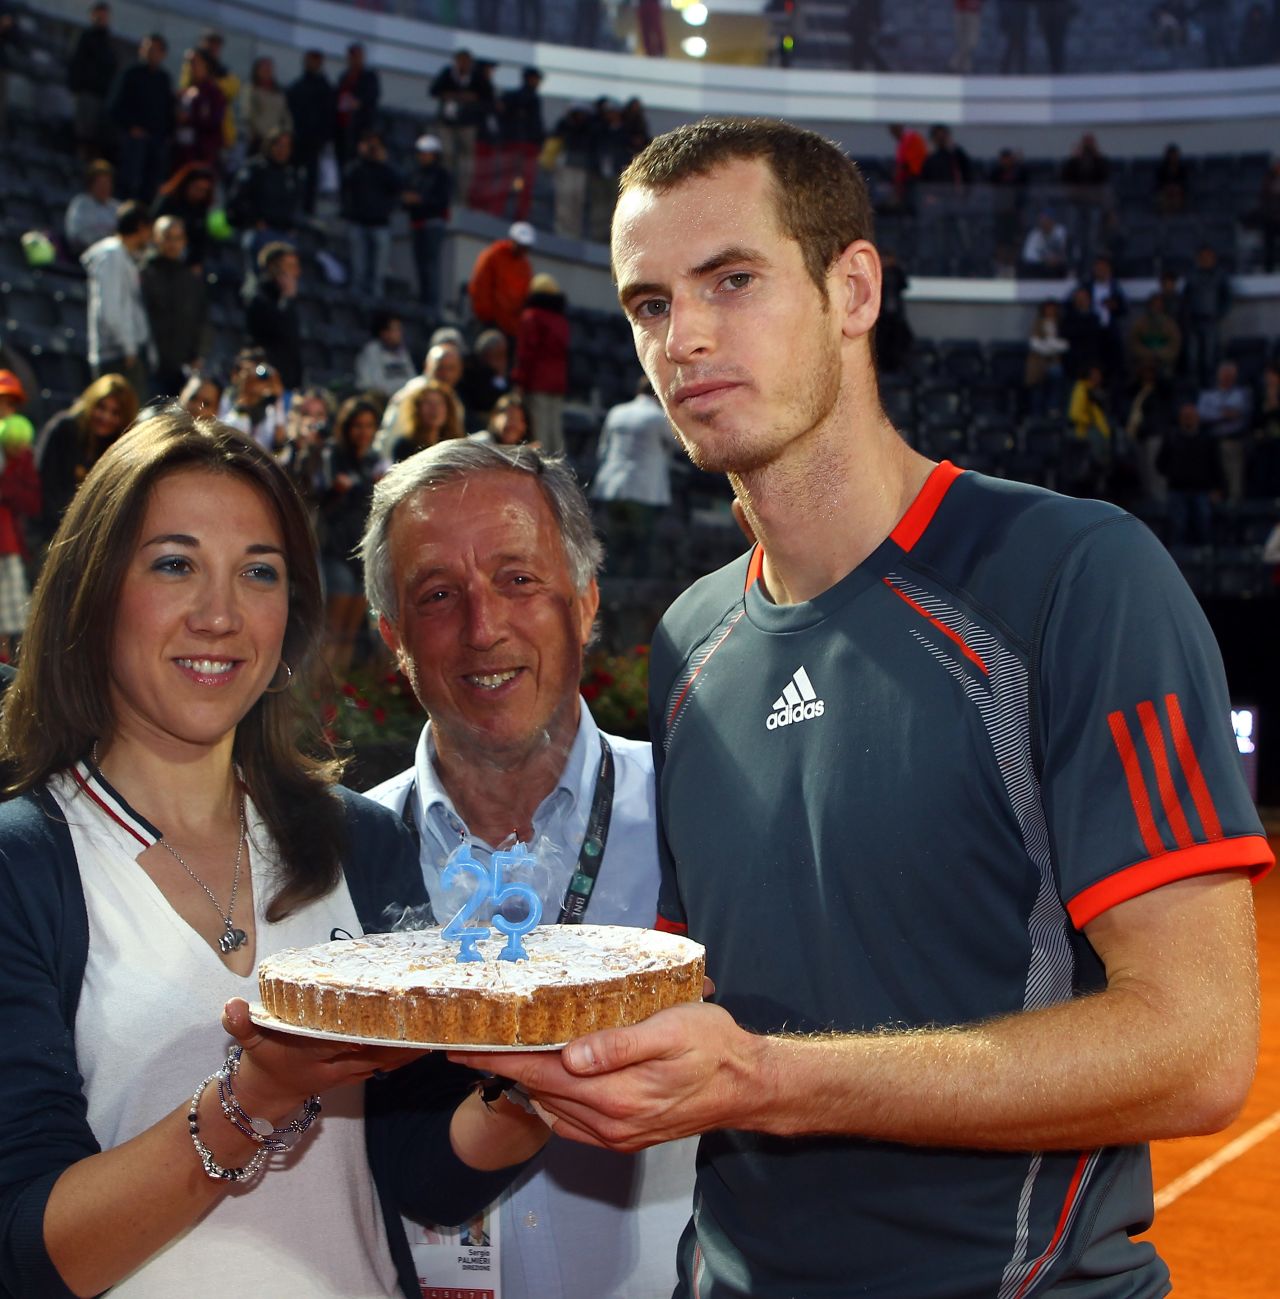 Like his childhood friend Djokovic, U.S. Open champion Andy Murray has also gone gluten-free. This cake he received for his 25th birthday, even if made without wheat, could still be problematic for his diet as an elite performer due to any processed sugars and dairy in the ingredients. "Hamish's protocols basically remove sugar and the gluten from your diet, sometimes the dairy, to help cleanse and restore the hormonal system and the digestive system," says tennis coach Pete McCraw. "It's the gut flora that the sugar plays havoc with, it changes the bacteria levels in the stomach, which for some athletes, means they digest food inefficiently."